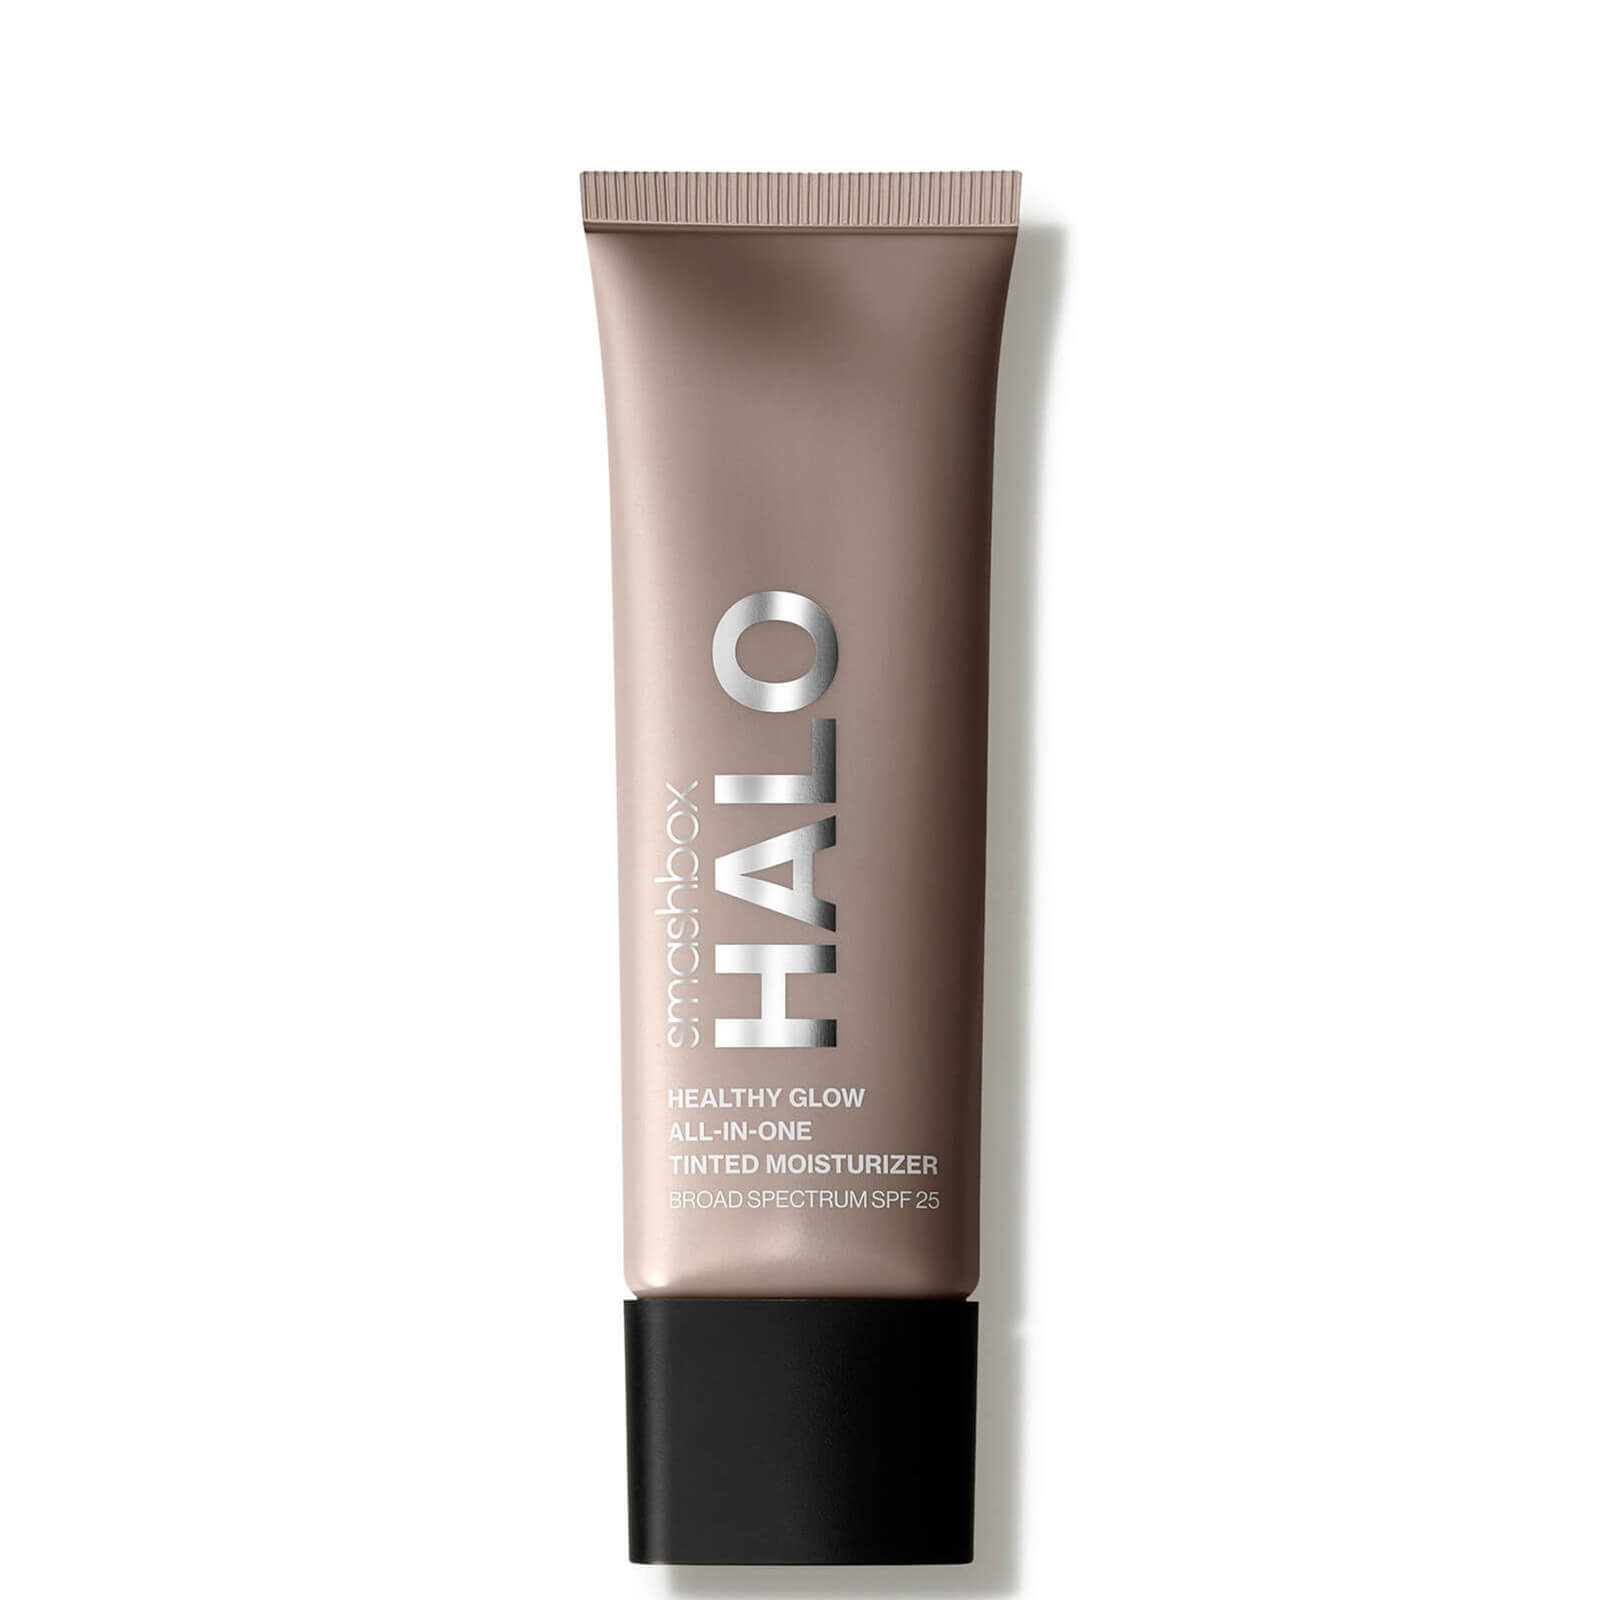 Image of Smashbox Halo Healthy Glow All-in-One SPF25 Tinted Moisturiser 40ml (Various Shades) - Light